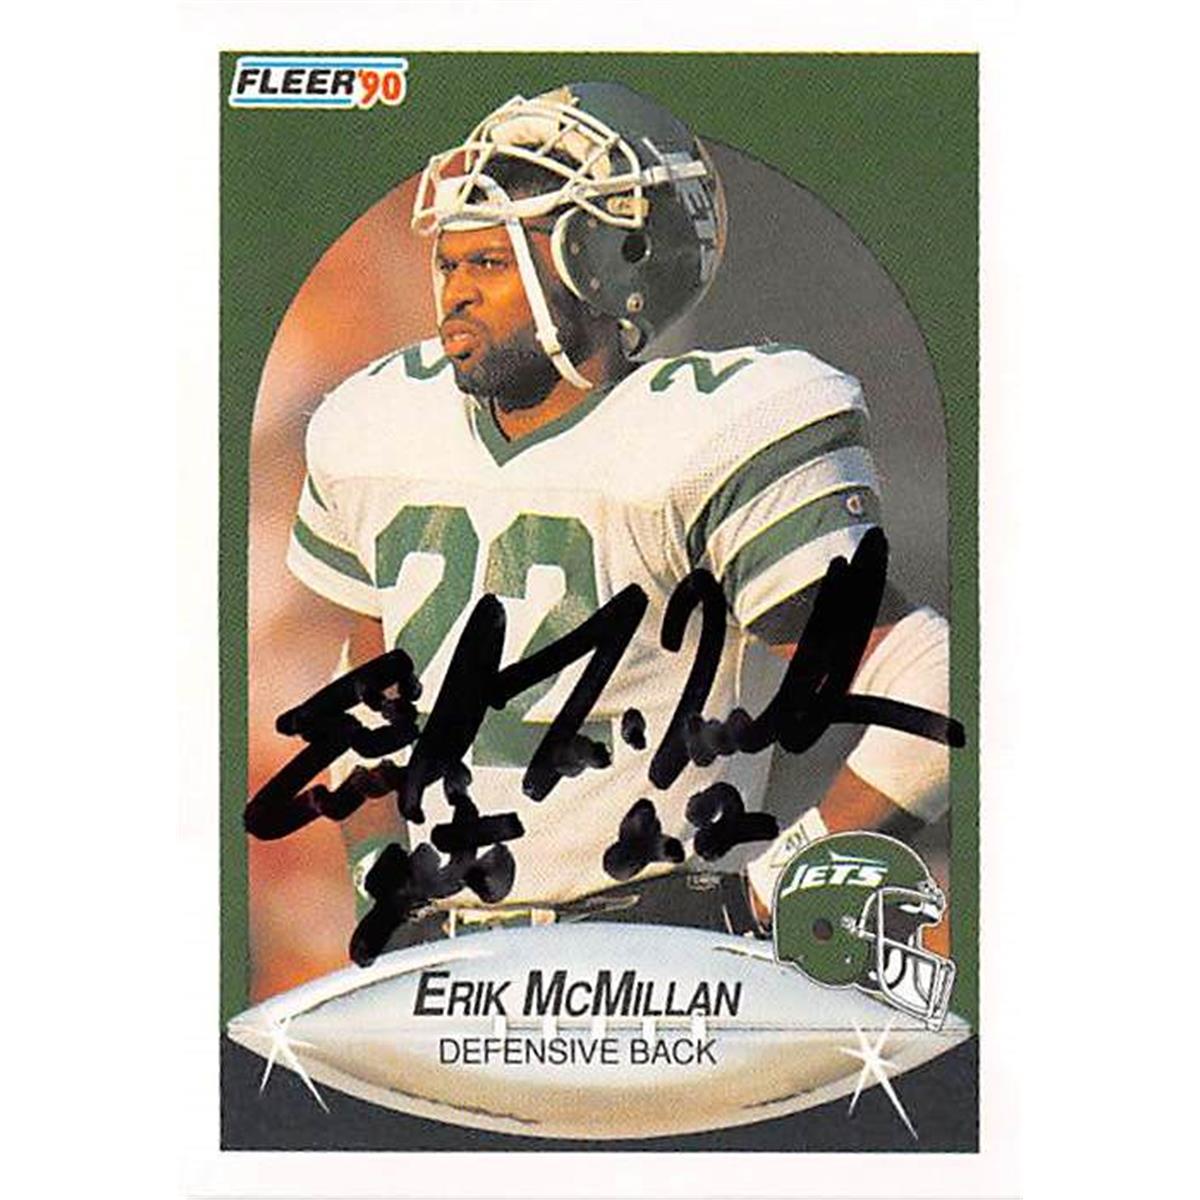 Picture of Autograph Warehouse 366696 Erik Mcmillan Autographed Football Card - 1990 Fleer 365